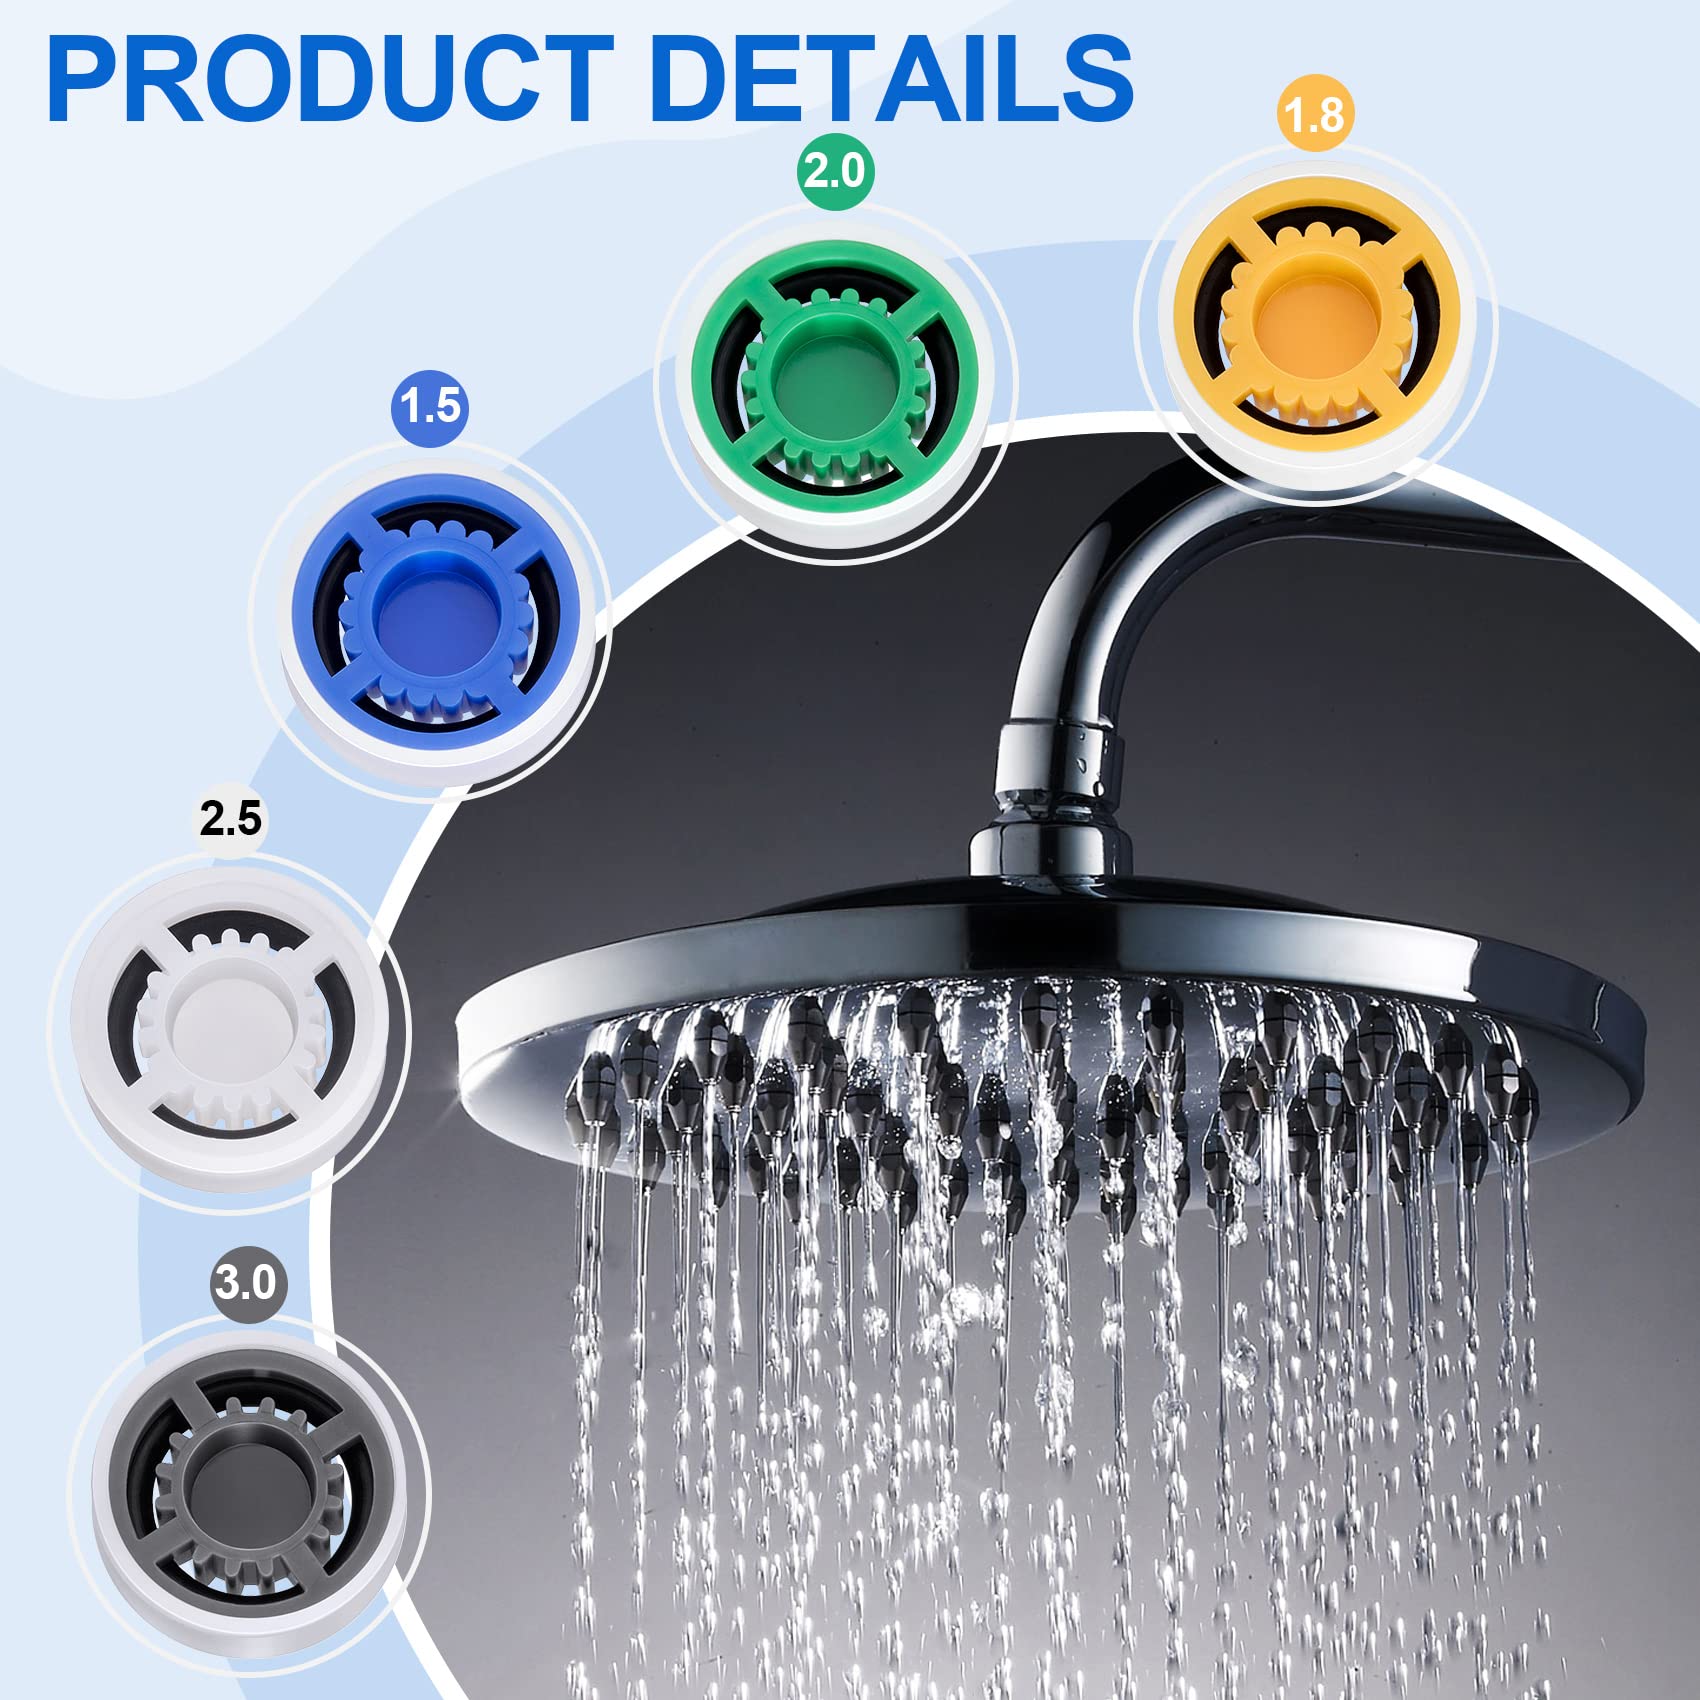 PAGOW 10pcs Shower Flow Reducer Limiter, gpm 1.5 1.8 2.0 2.5 3.0 Shower Head Flow Restrictor, Shower Head Water Saver Adapter Set for Handheld Shower, Bathroom, Toilet (0.56x0.54 x 0.21inch)